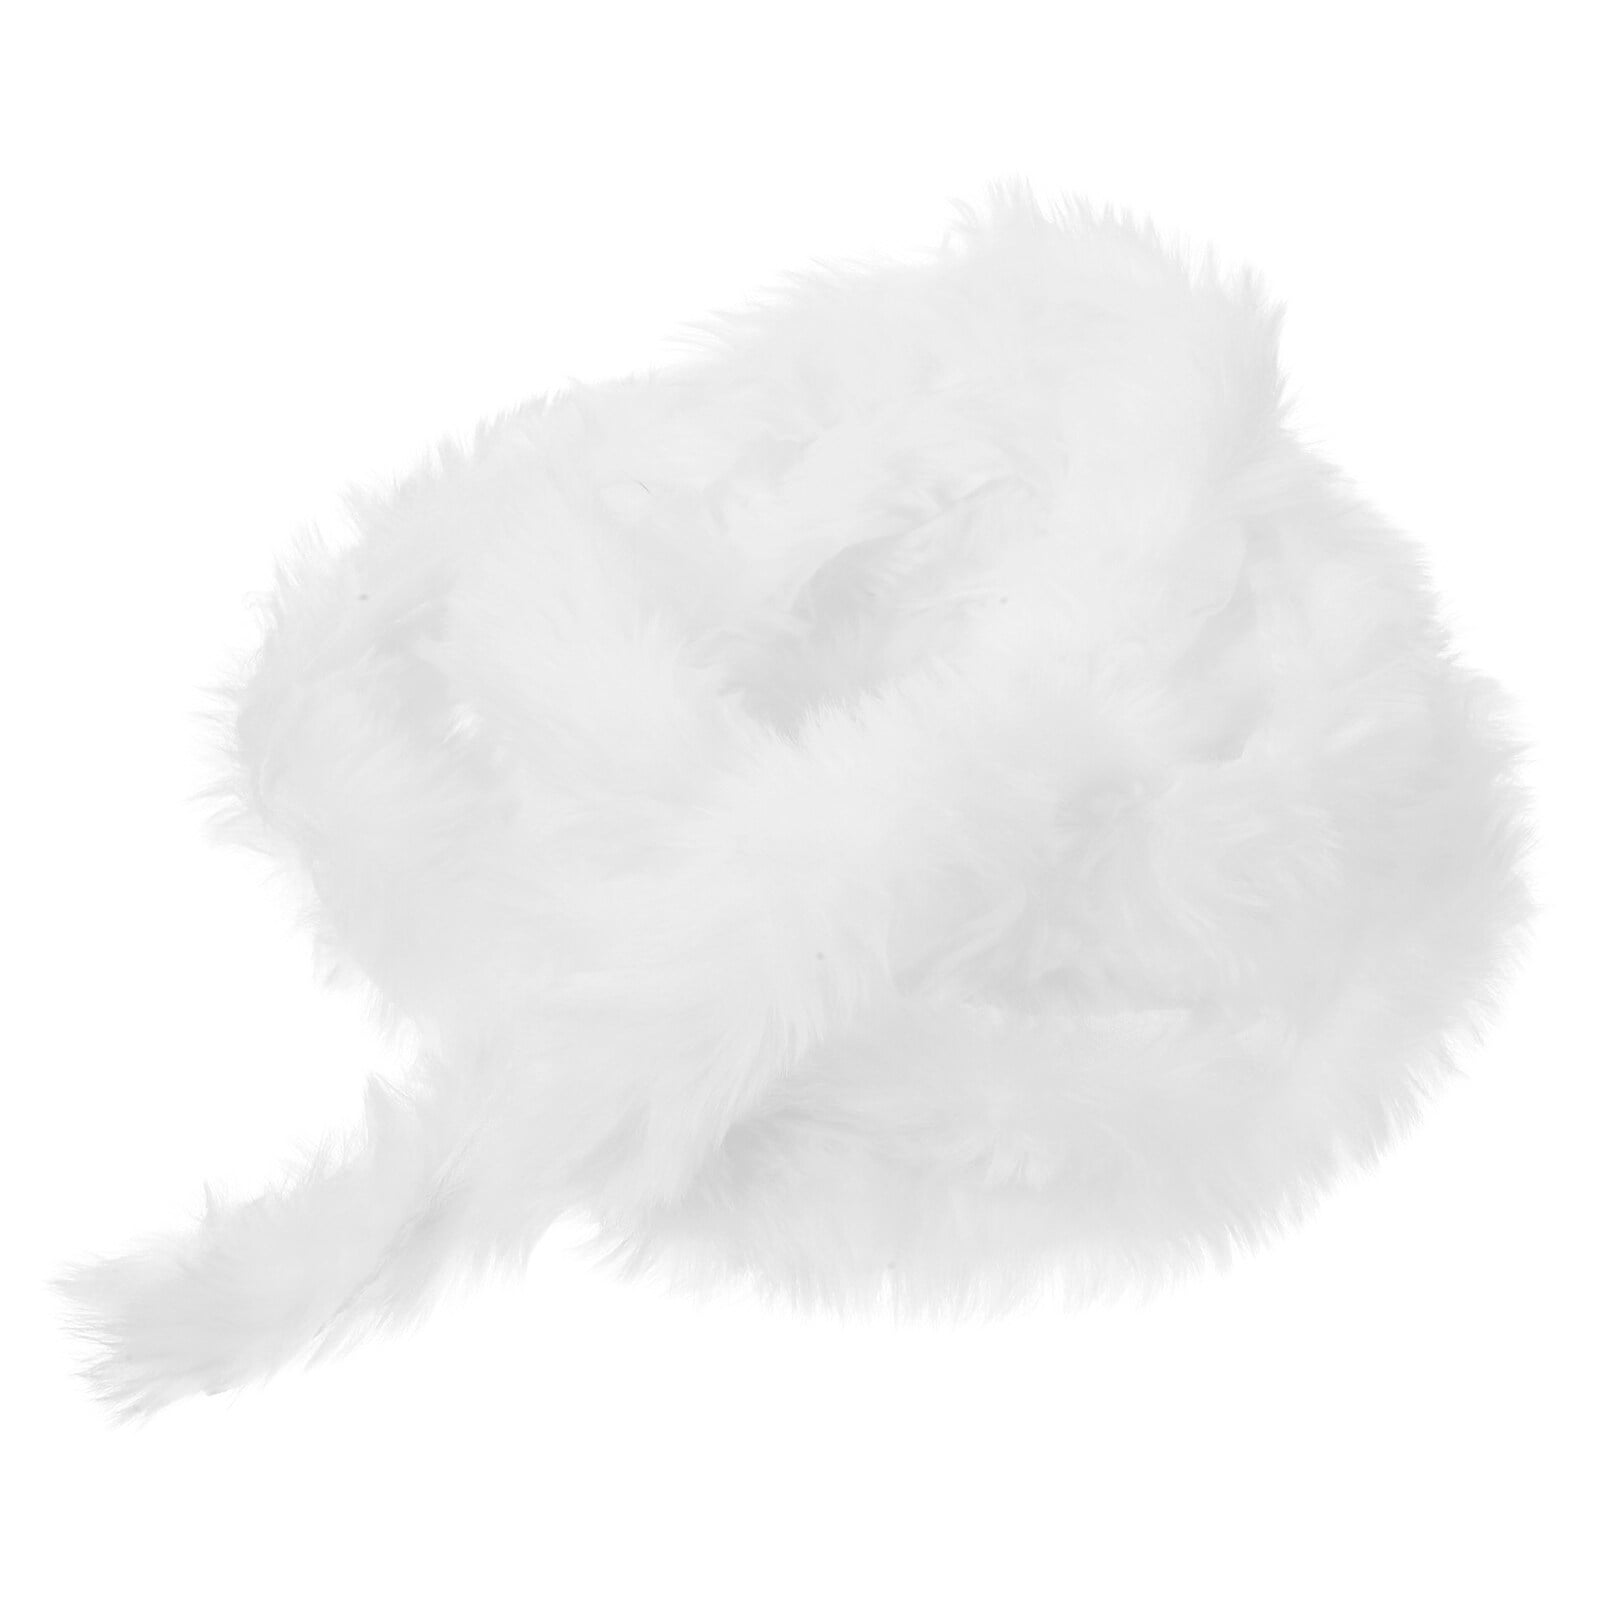 3 ply 1.5M long White Ostrich Feather Boa, High Quality BRAND NEW